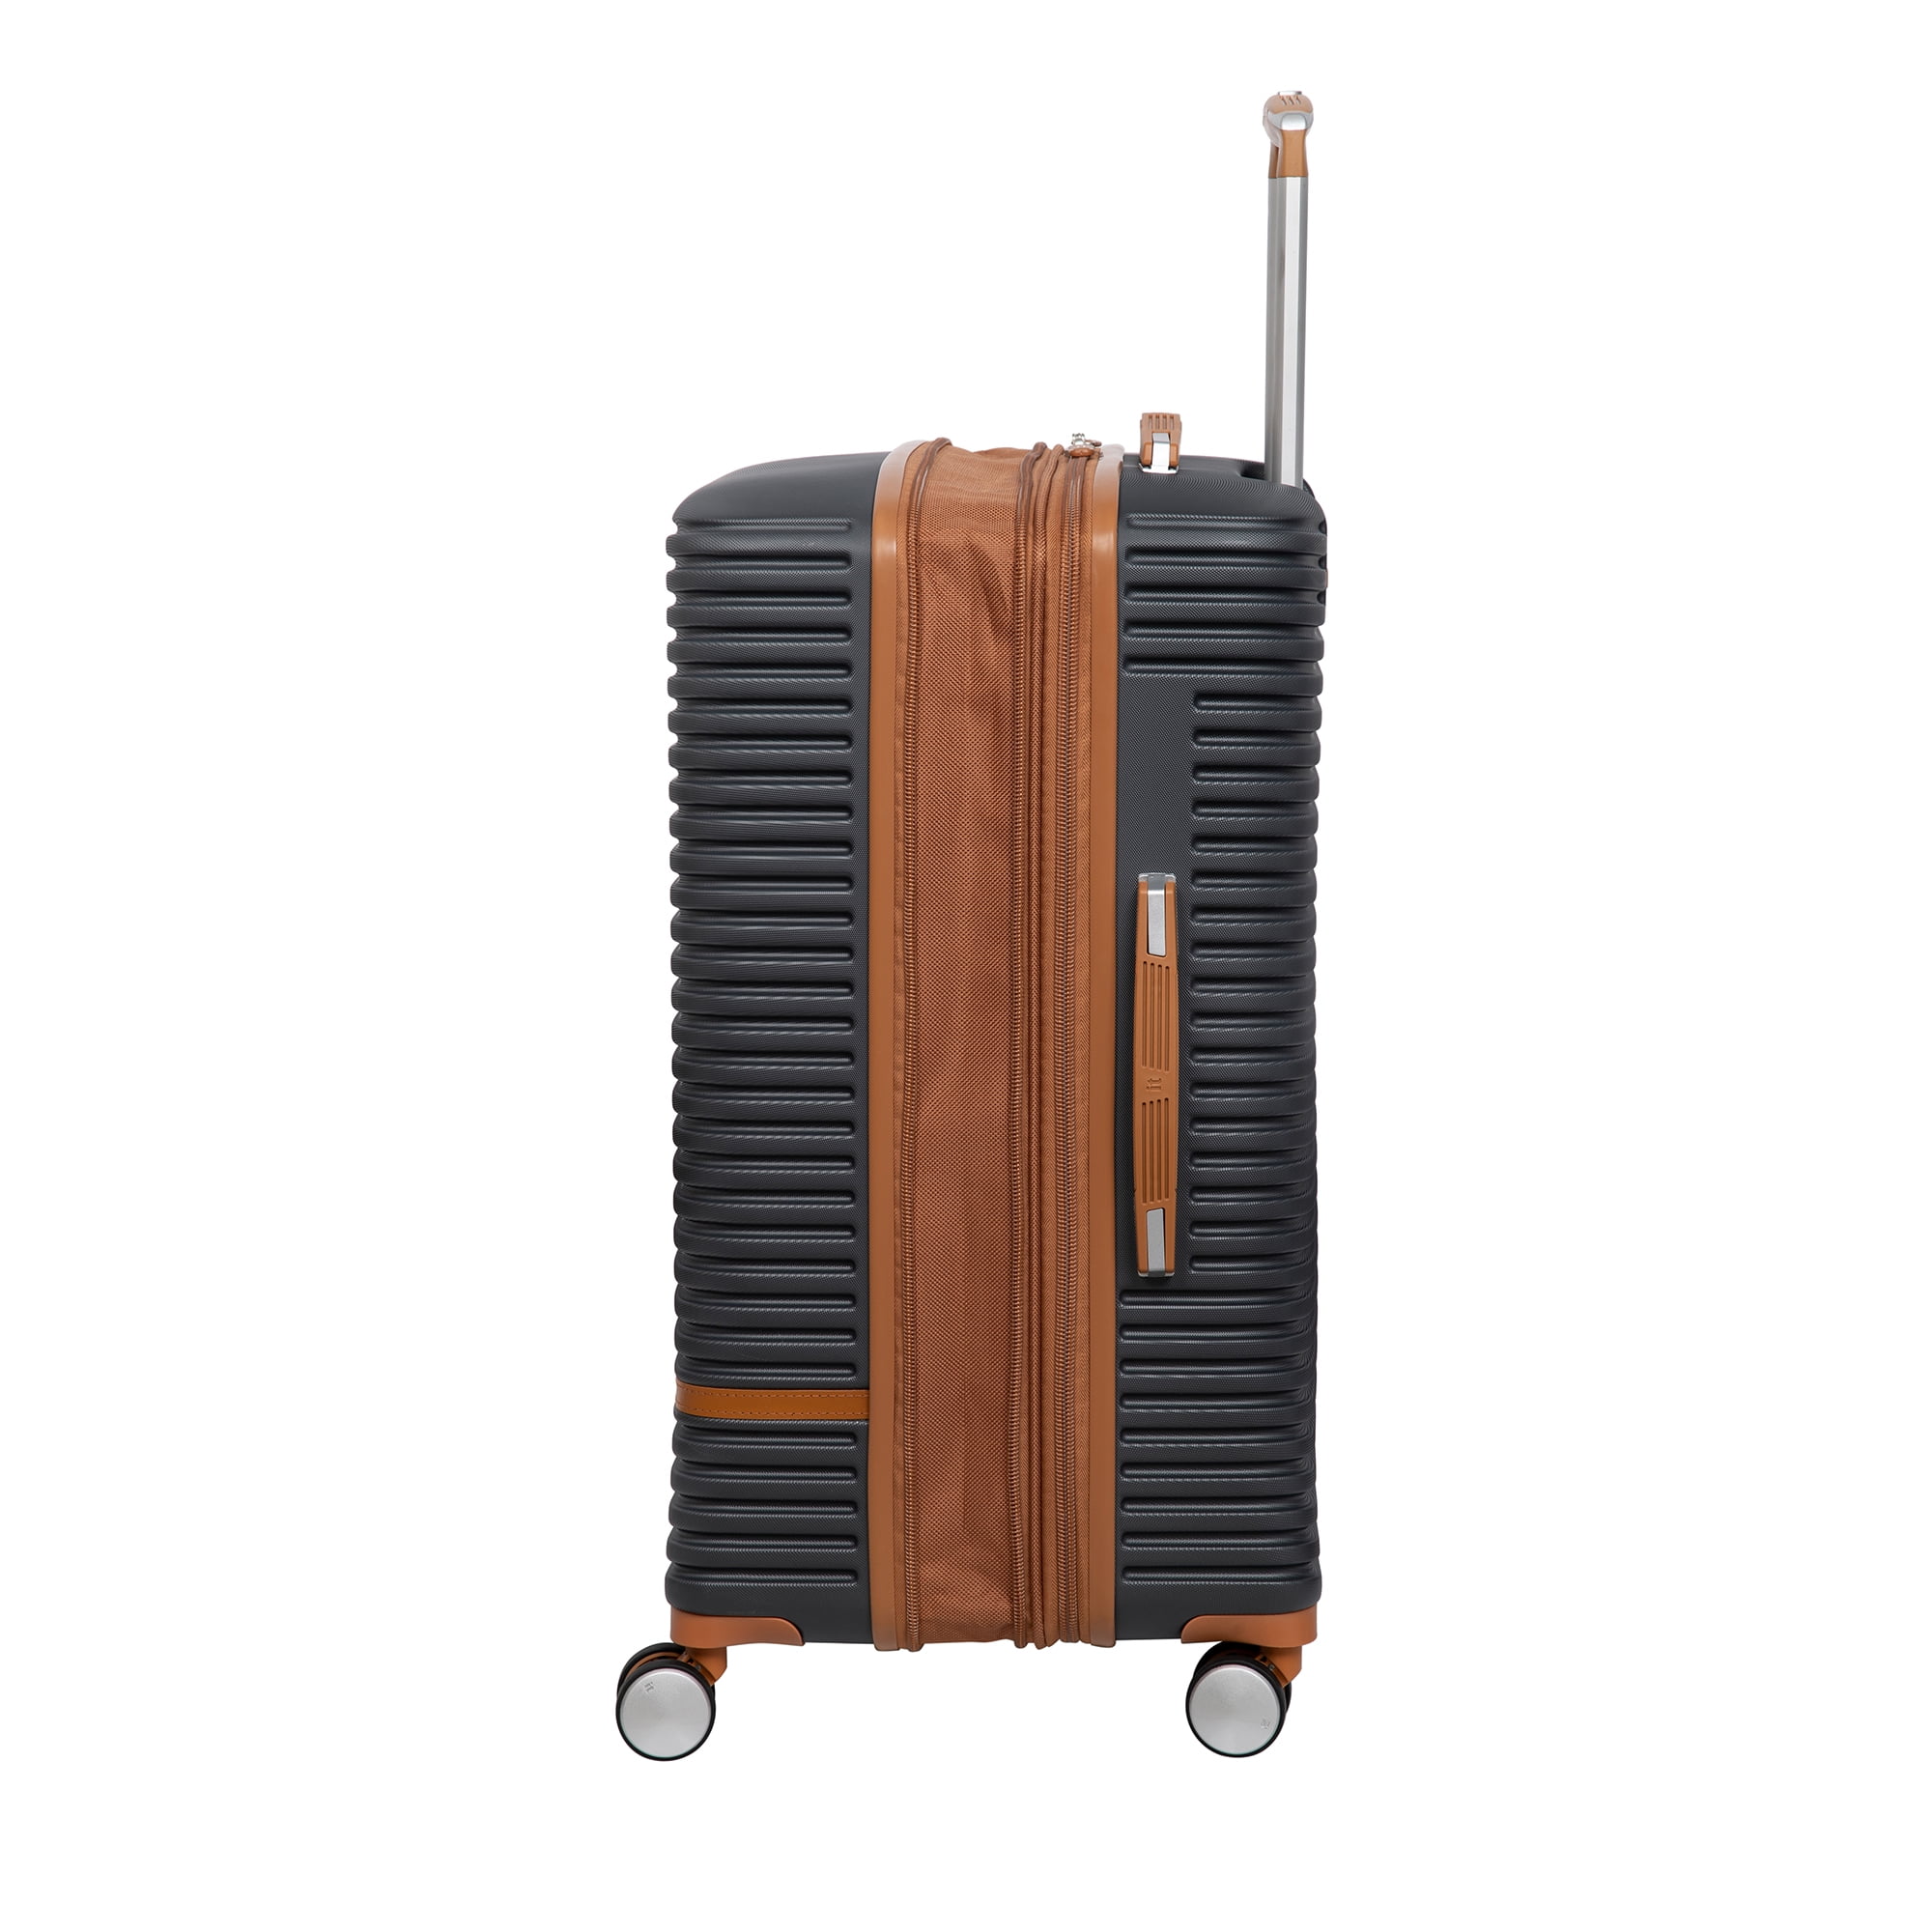 Linea Turin Hard Suitcase, Travel Luggage, PP Suitcase (22inch Cabin  Friendly)